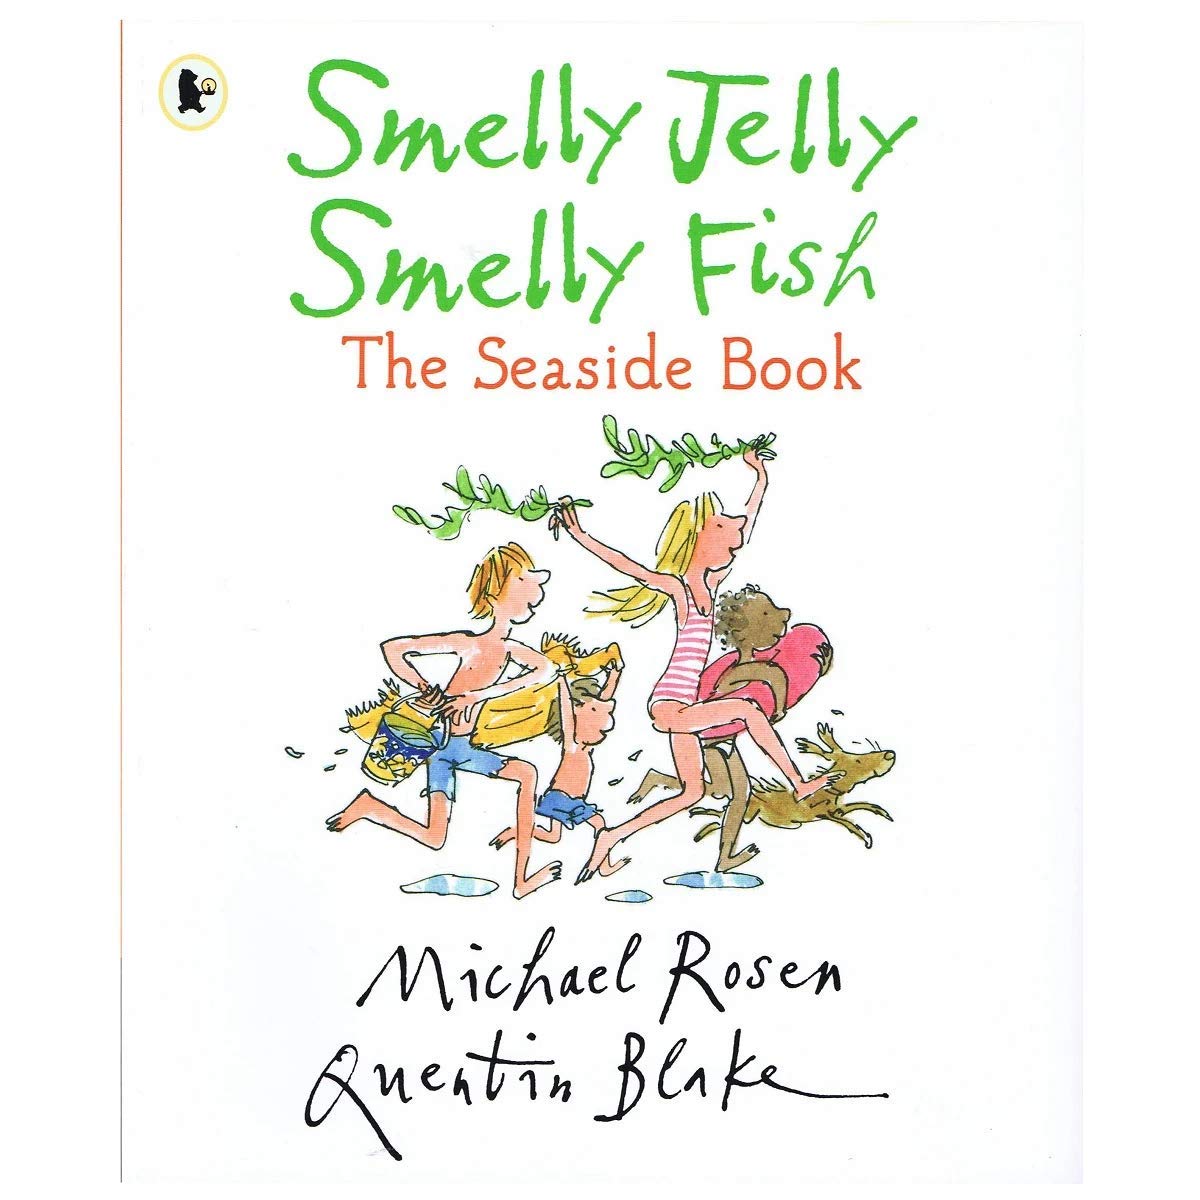 Smelly Jelly Smelly Fish The Seaside Book by Michael Rosen and Quentin Blake